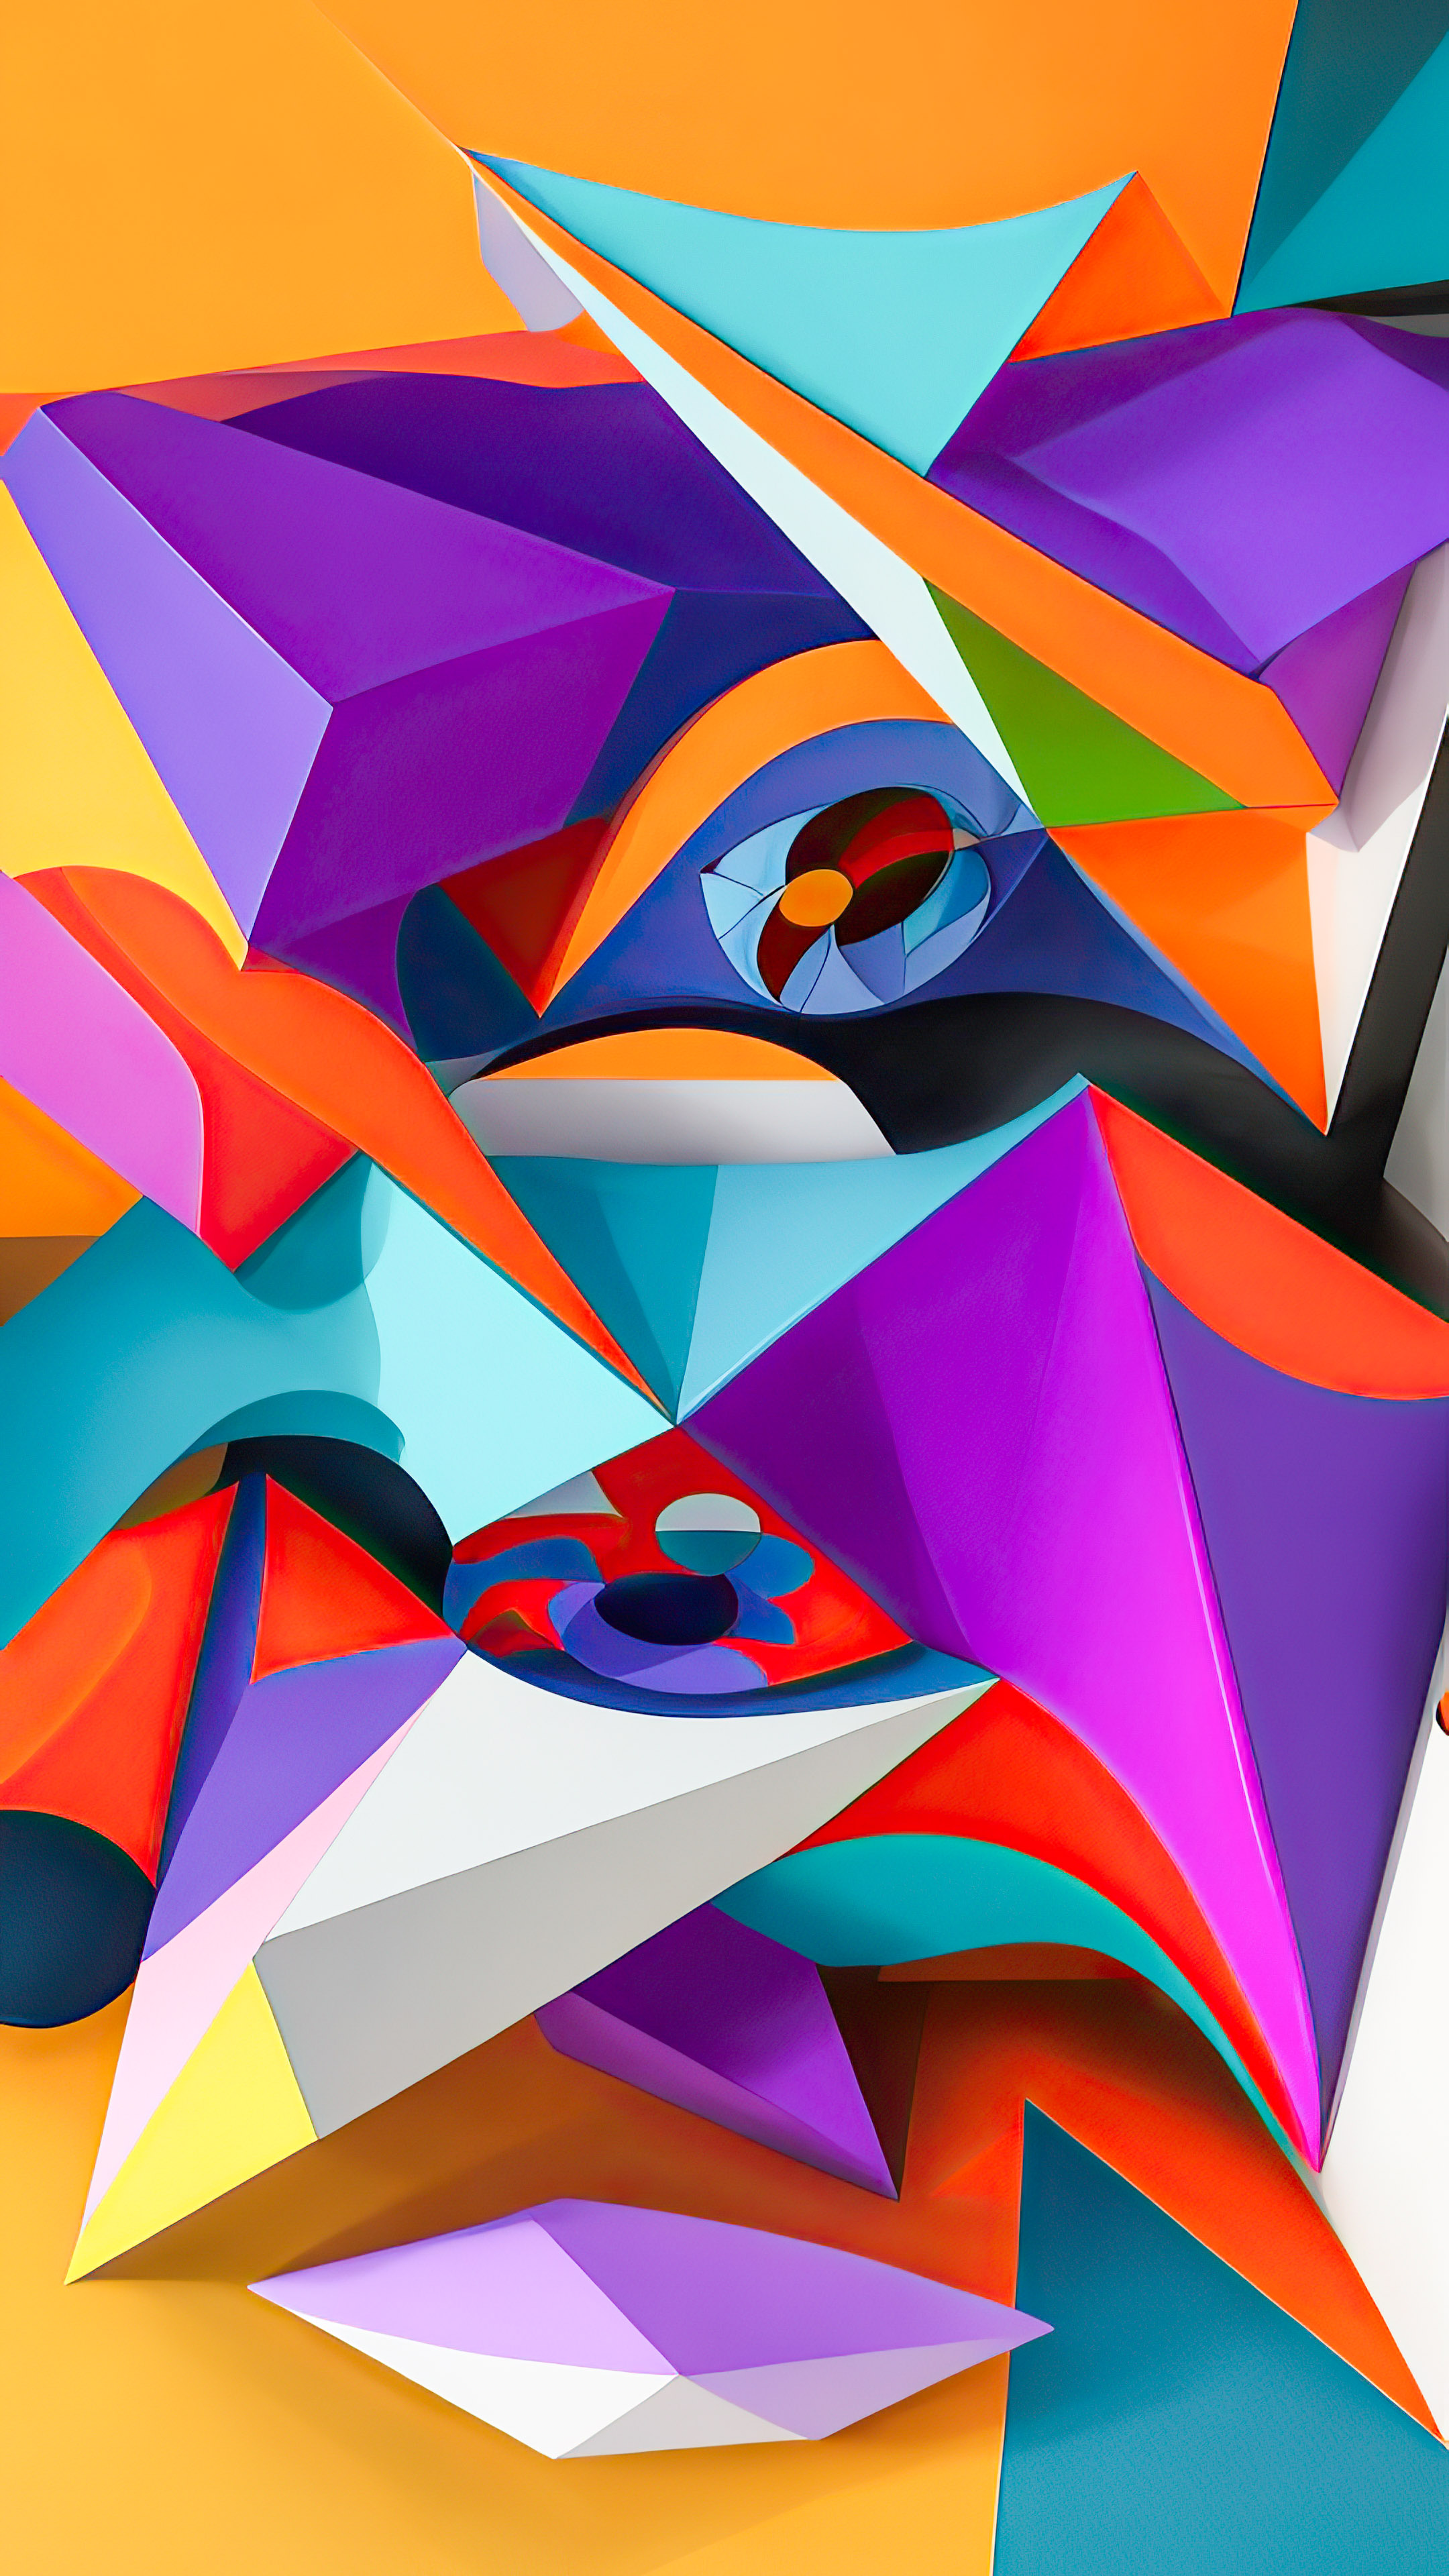 Experience the dynamic visual feast on your mobile device with our abstract wallpaper in 4K, presenting 3D geometrical and colorful art.